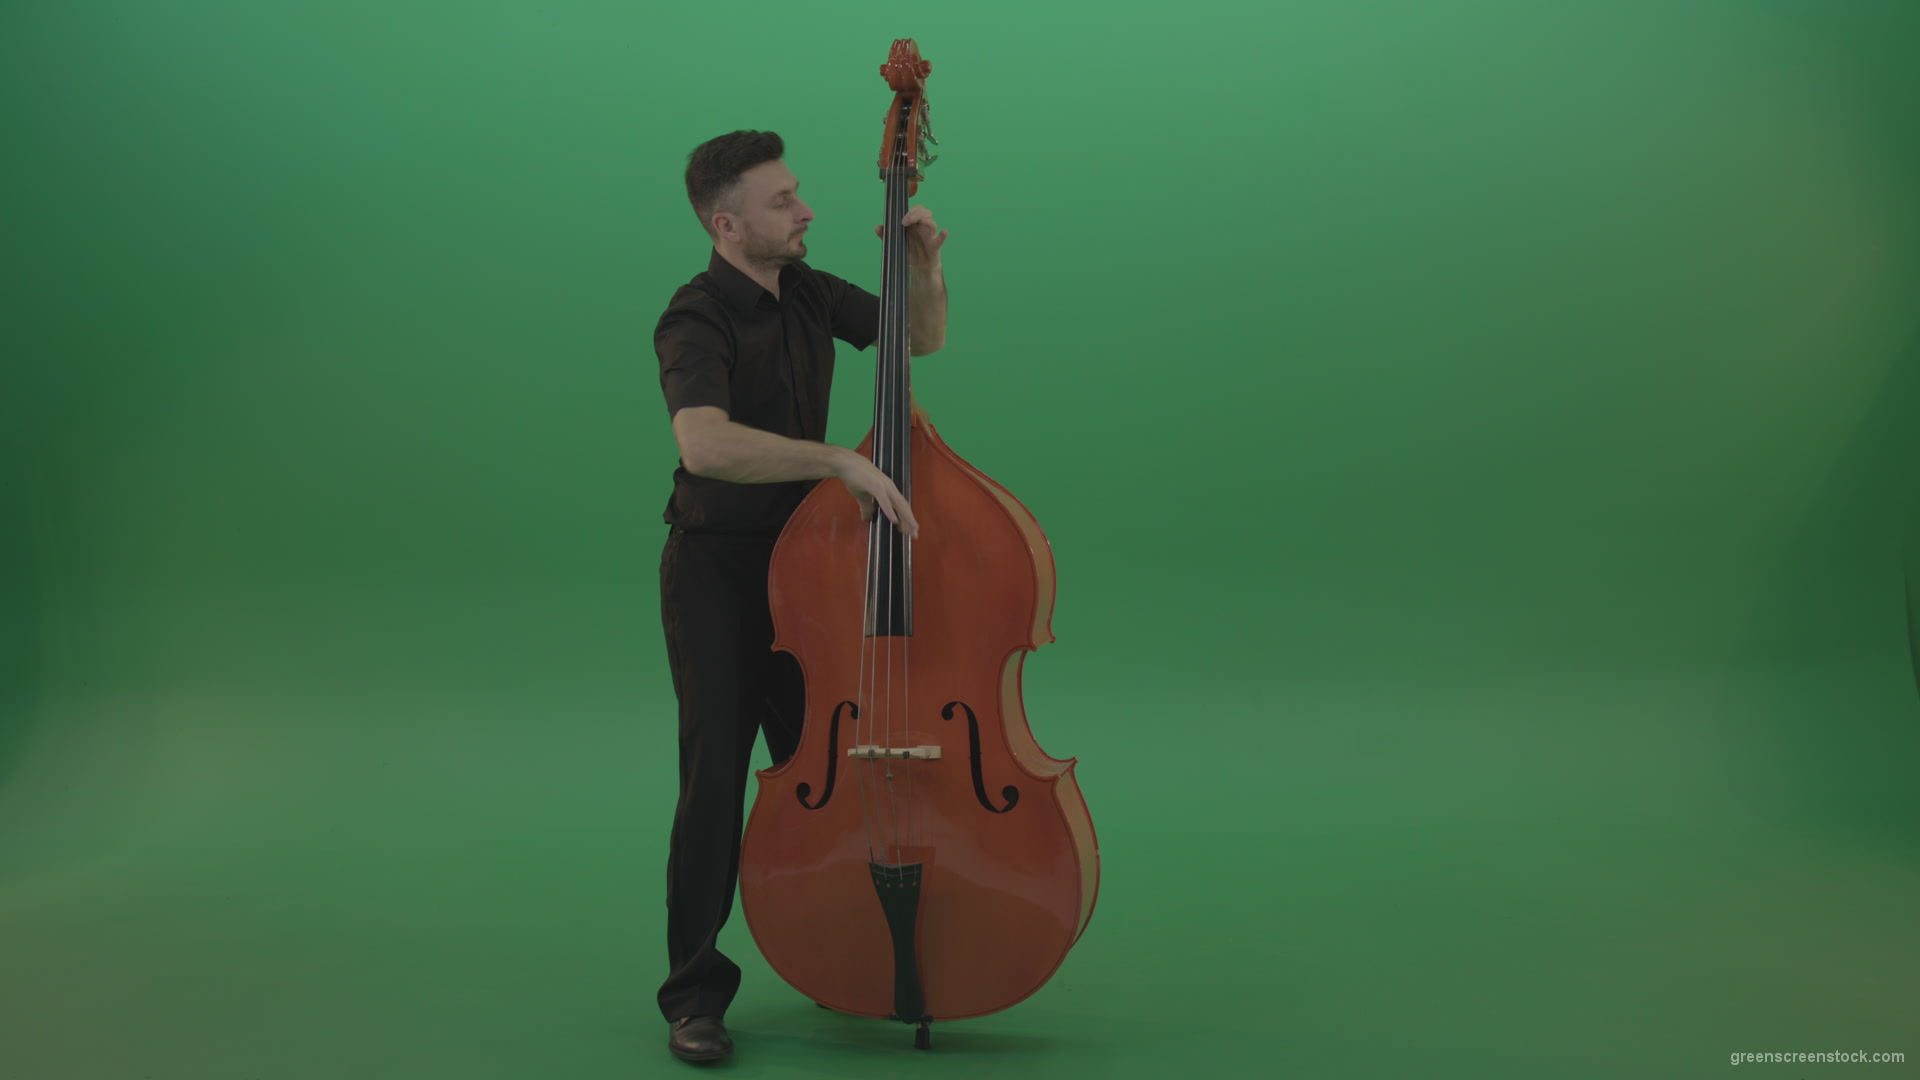 Full-size-man-in-black-uniform-play-jazz-rock-on-double-bass-String-music-instrument-isolated-on-green-screen_007 Green Screen Stock